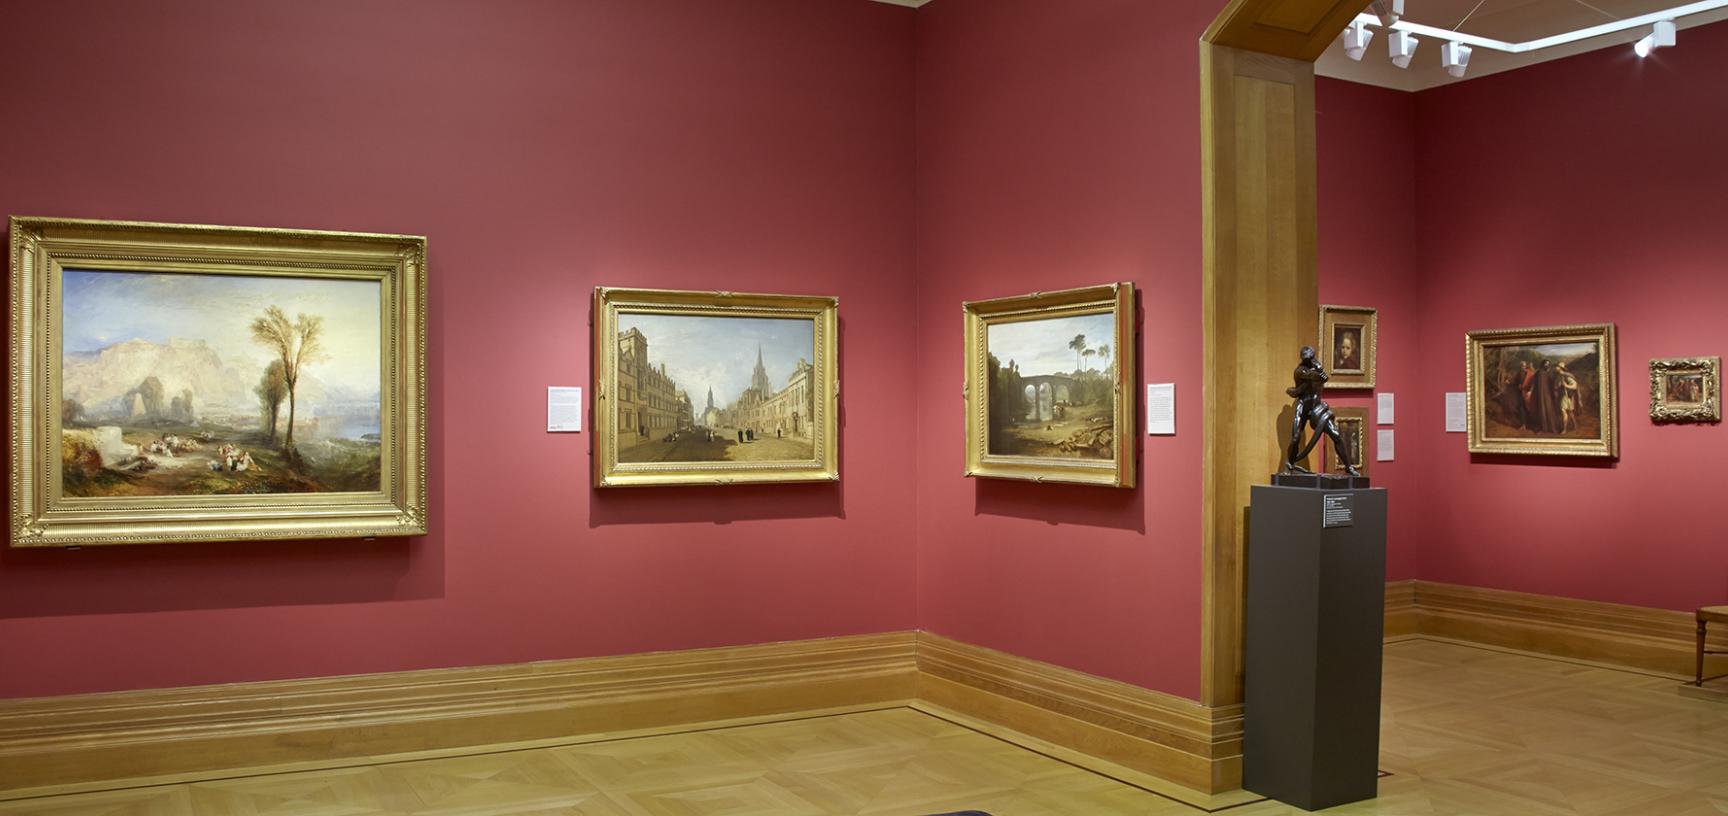 The 19th-Century Art Gallery at the Ashmolean Museum